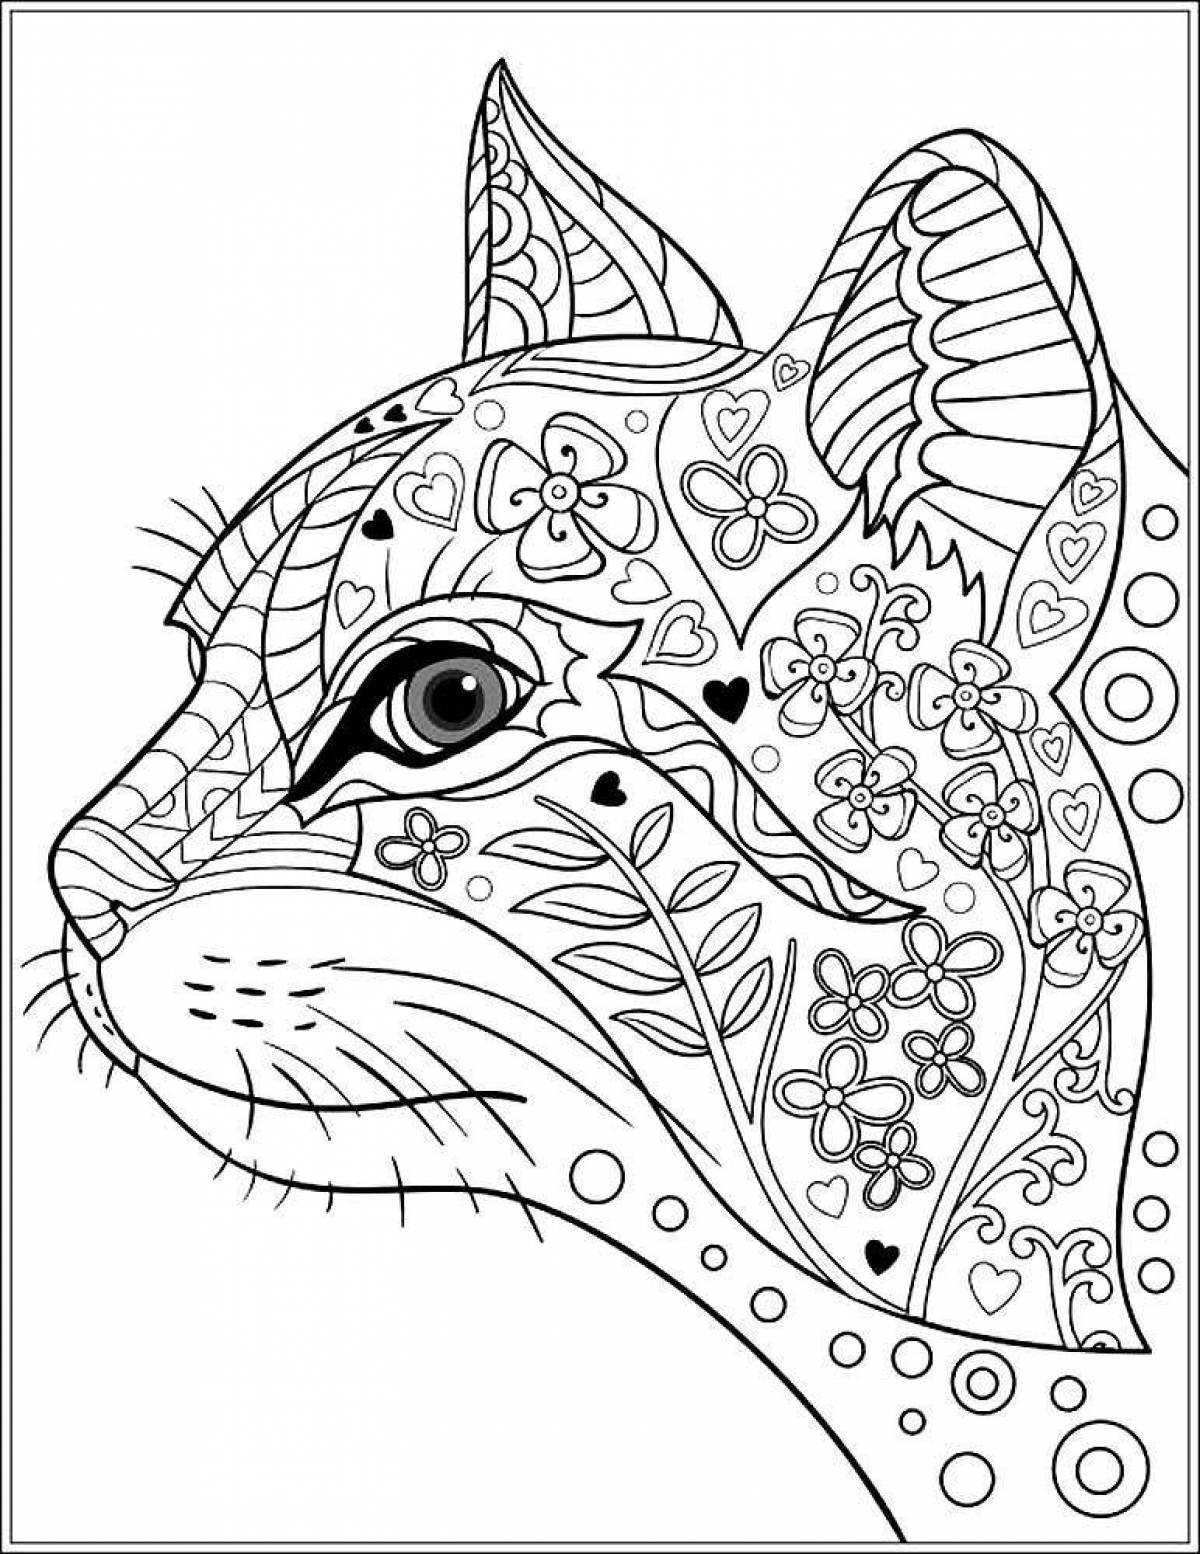 Attractive coloring book for girls 10 years old animals